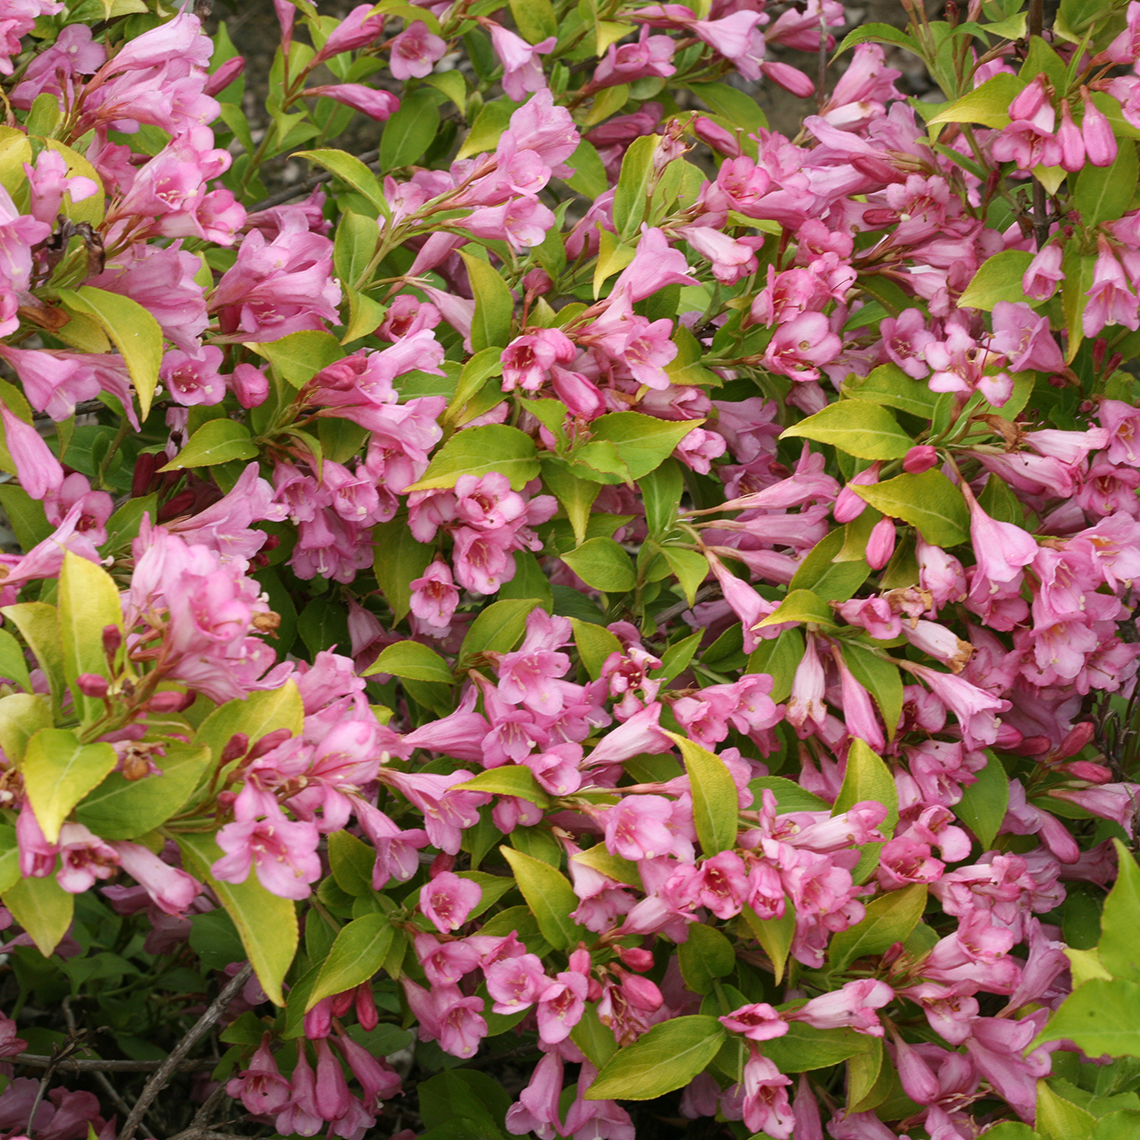 Closeup of the lime green foliage contrasting with the pink blooms of Snippet Lime weigela